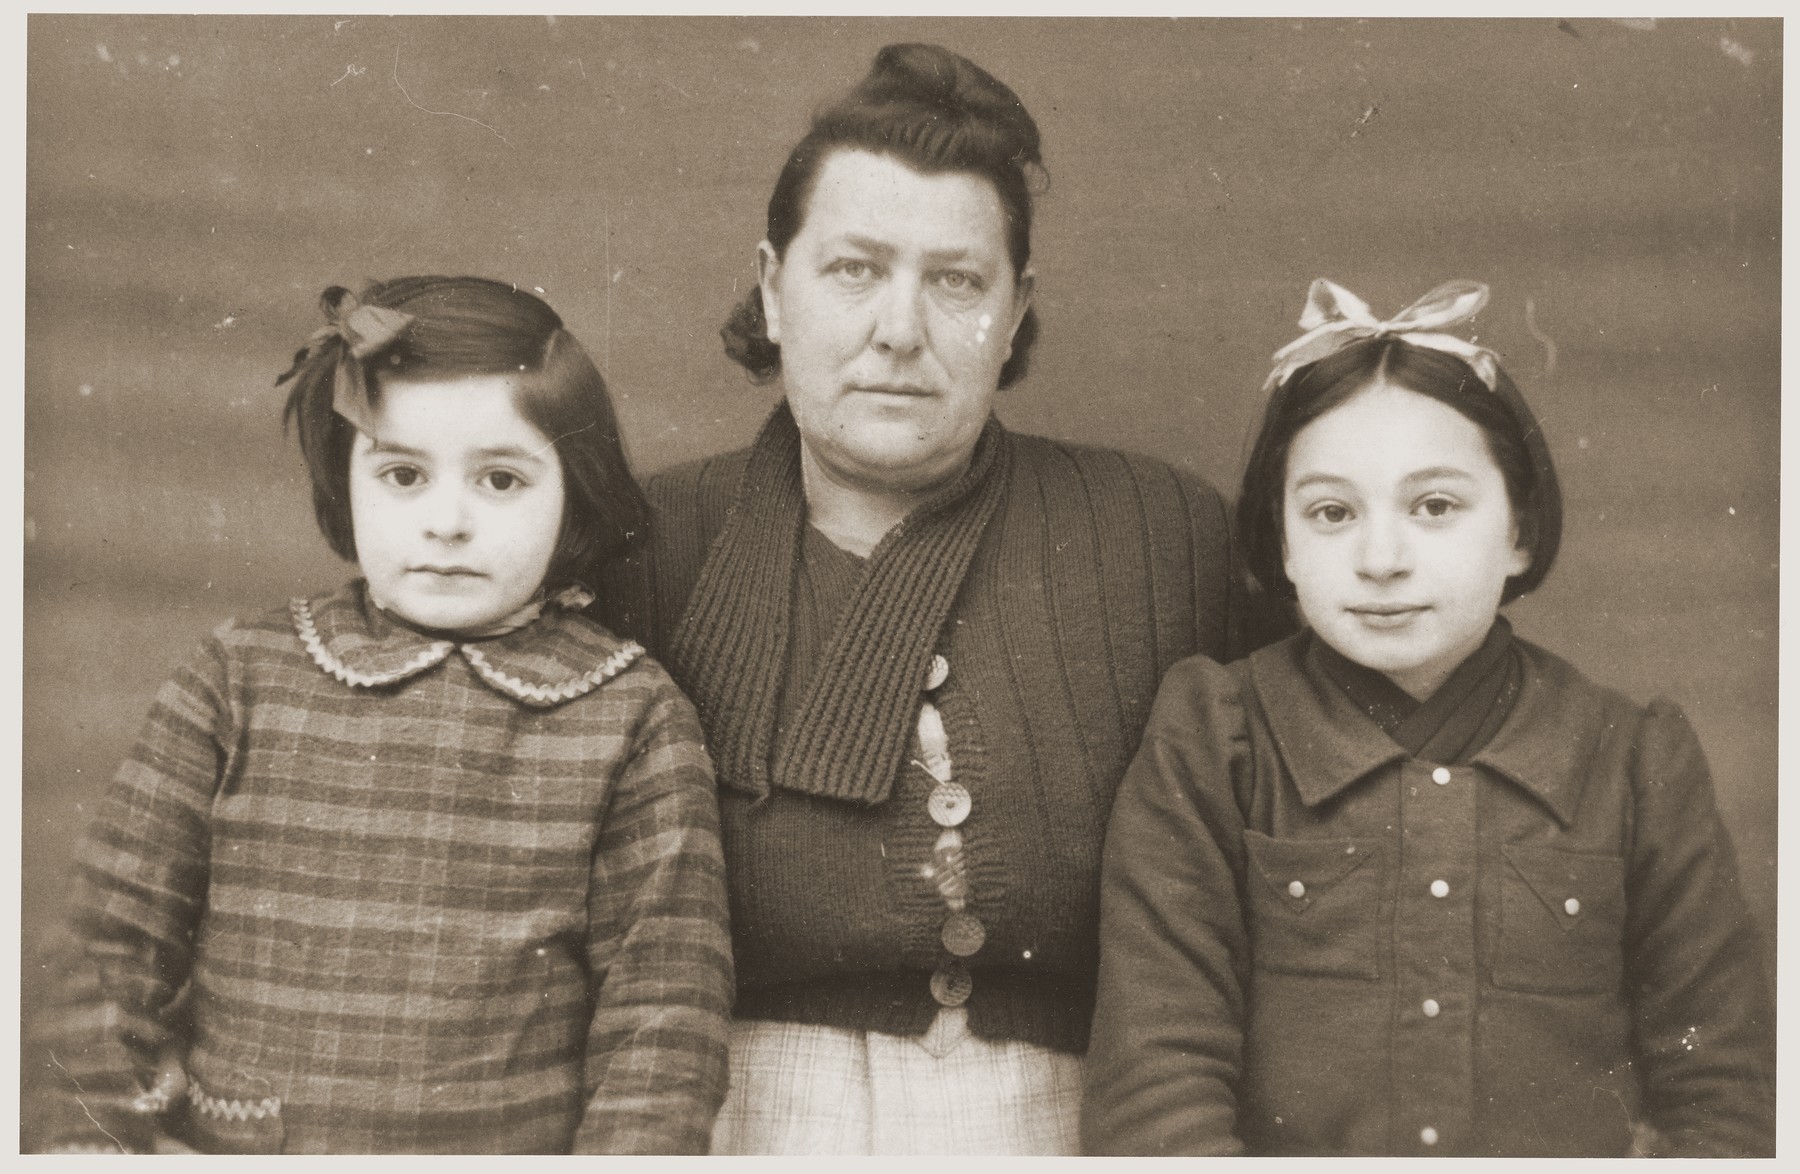 Eva and Rivka Tuchsznajder with their caregiver, Emma Blanc, at St. Jean-de-Vedas, where they were taken after their release from the Rivesaltes internment camp.